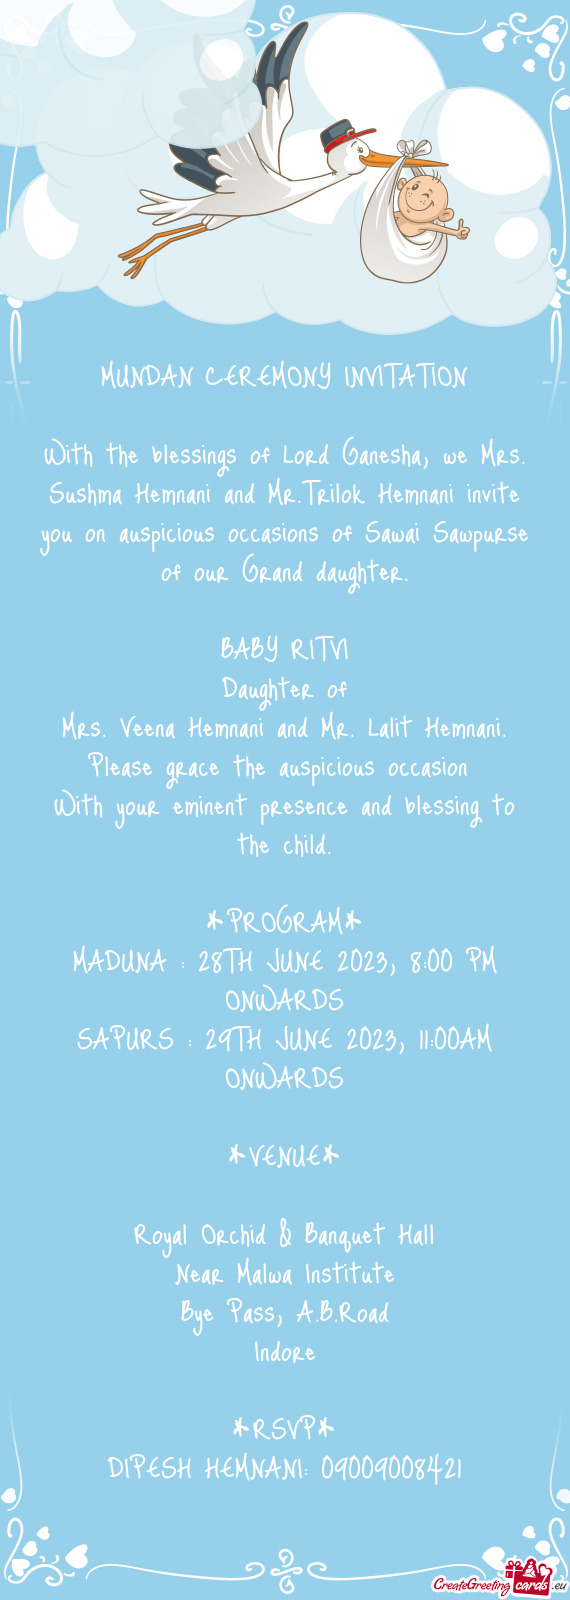 With the blessings of Lord Ganesha, we Mrs. Sushma Hemnani and Mr.Trilok Hemnani invite you on auspi